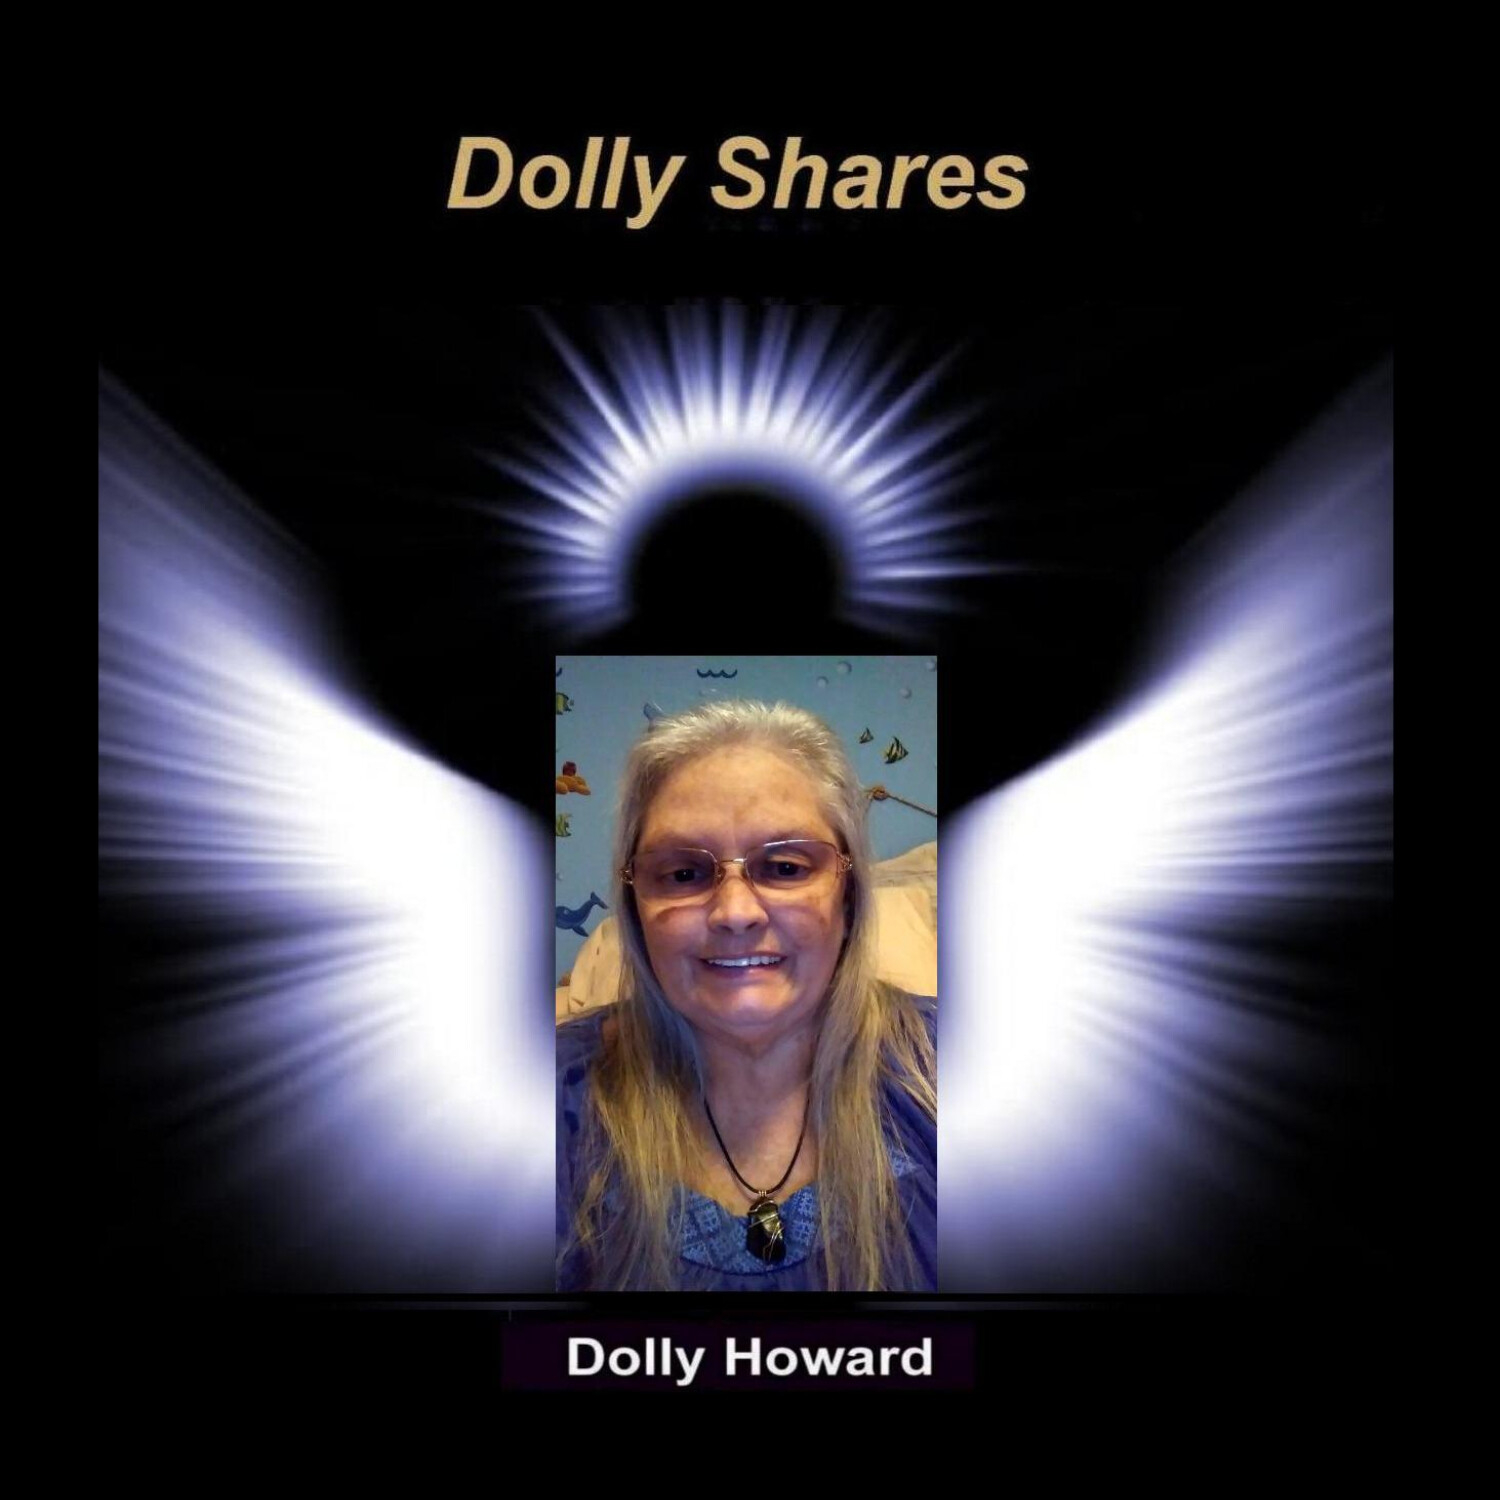 DOLLY SHARES with Dolly Howard 4/3/19 - For Men Mostly